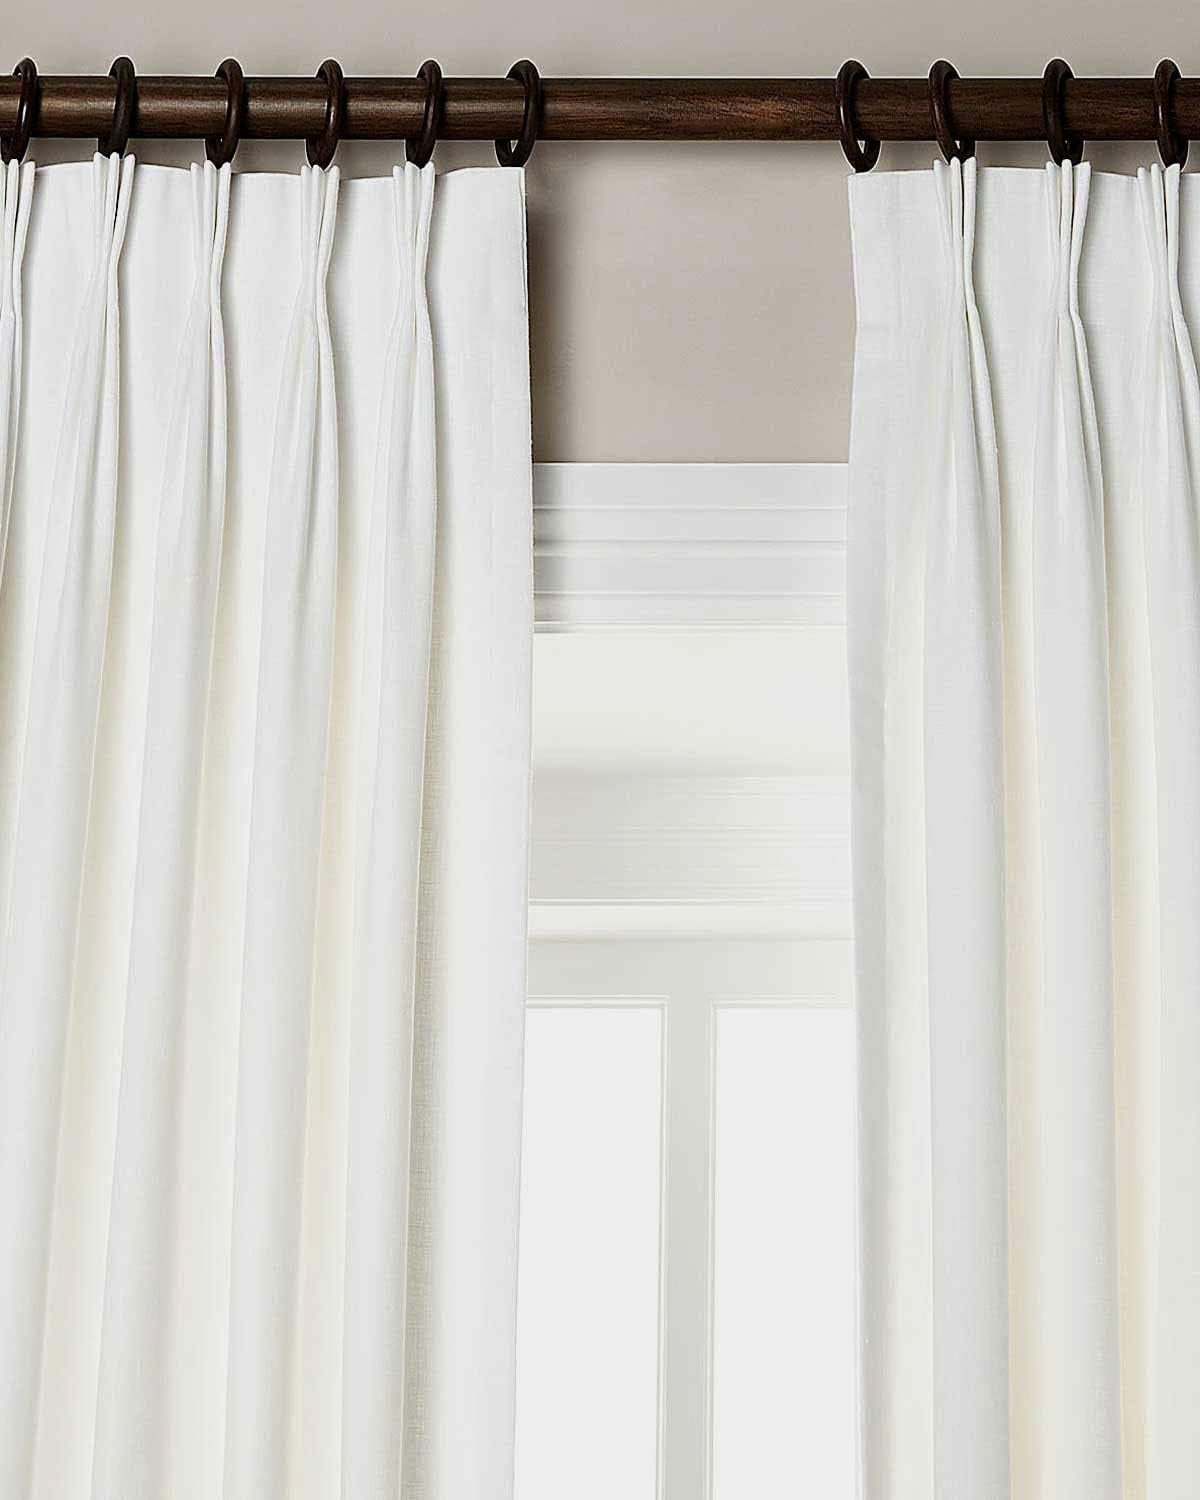 Silk N Drapes and More 100% Linen Pinch Pleated Lined Window Curtain Panel Drape (White, 27" W X 96" L)  imported White 27 In X 132 In (W X L) 